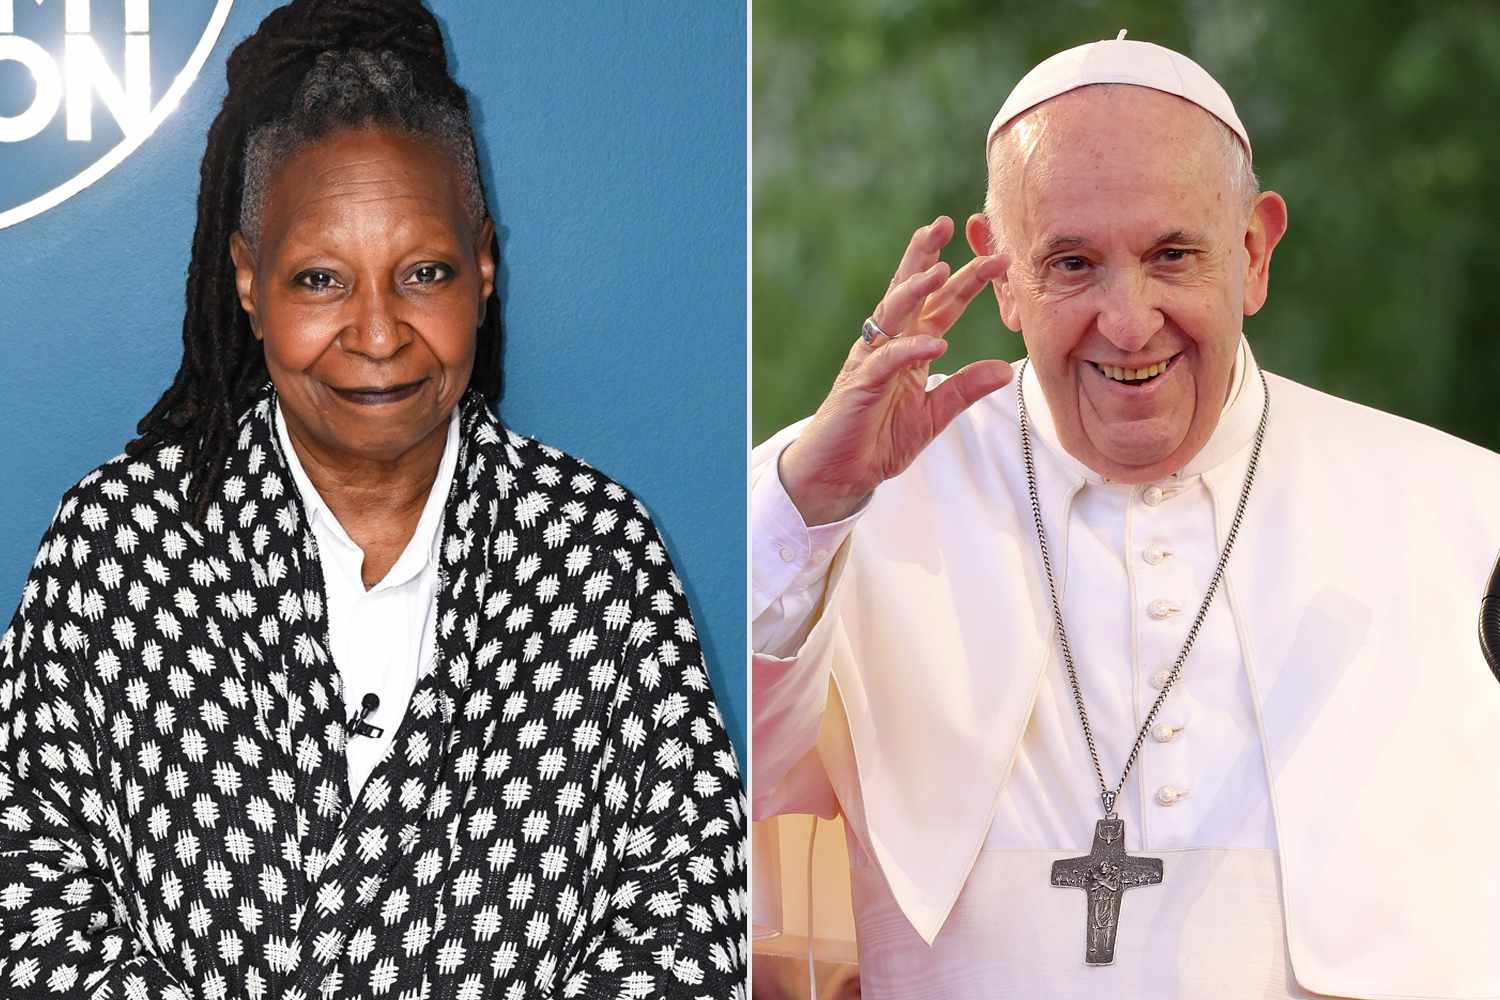 Whoopi Goldberg Offered Pope Francis a Role in 'Sister Act 3': 'He Said He'd See What His Time Is Like'